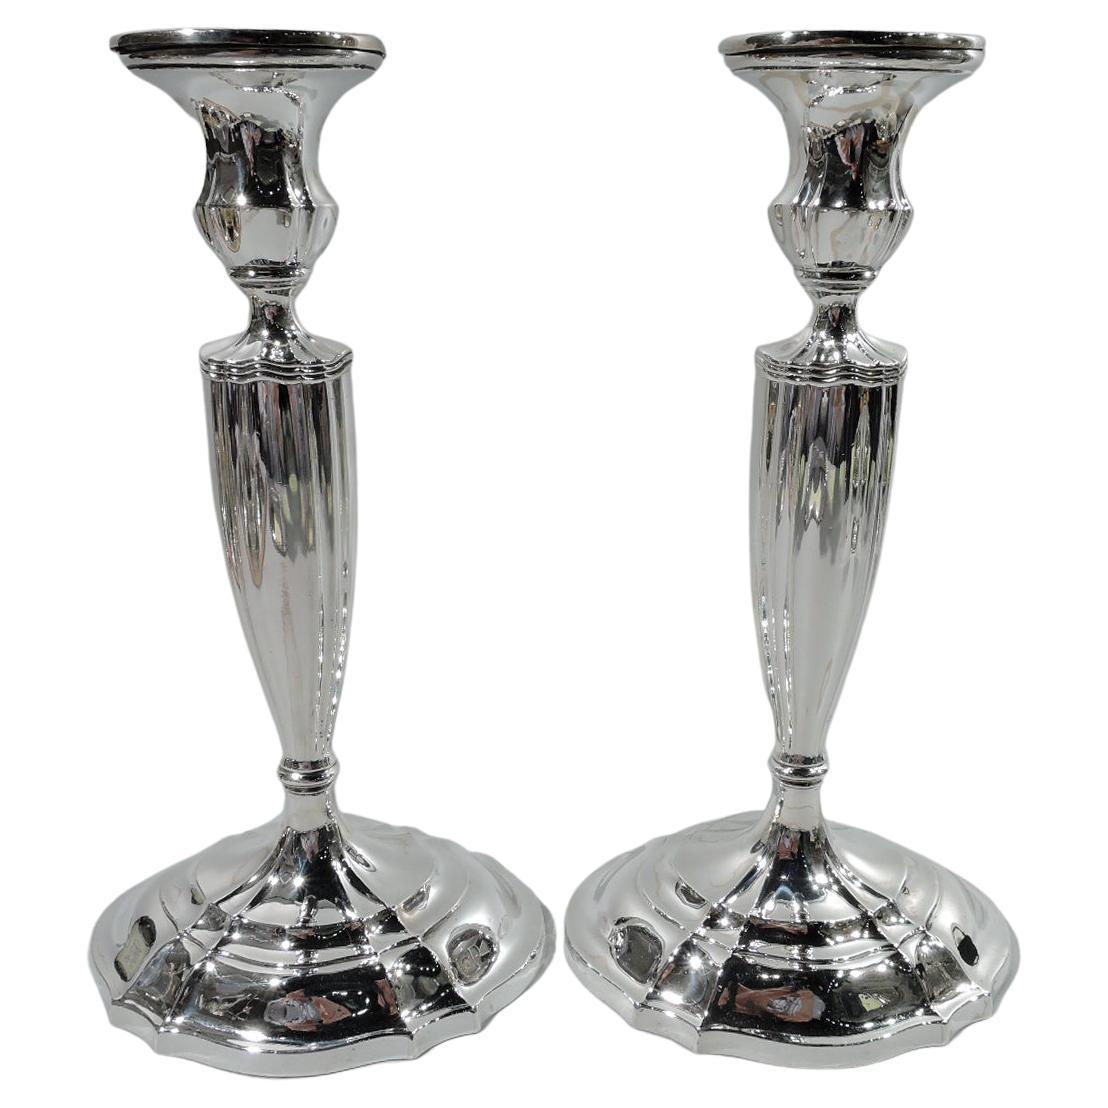 Pair of American Edwardian Sterling Silver Candlesticks by Gorham